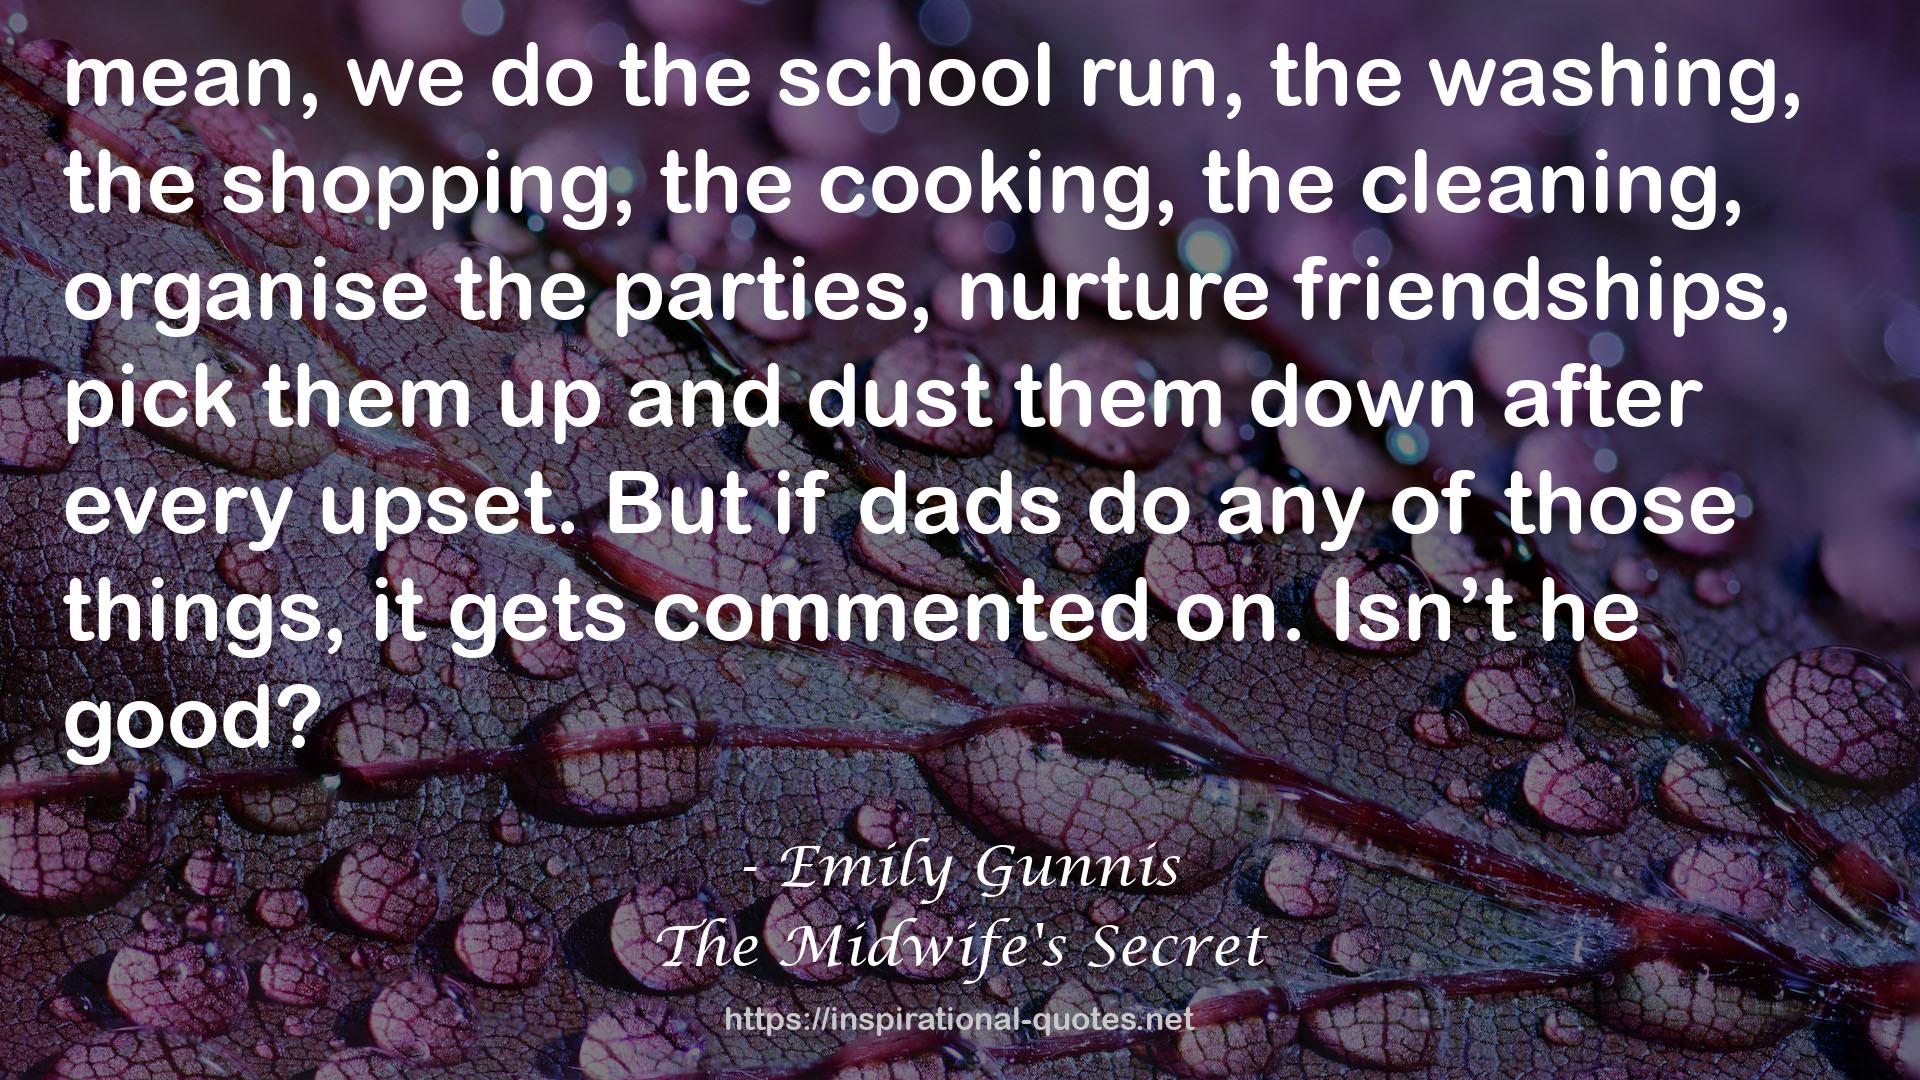 The Midwife's Secret QUOTES